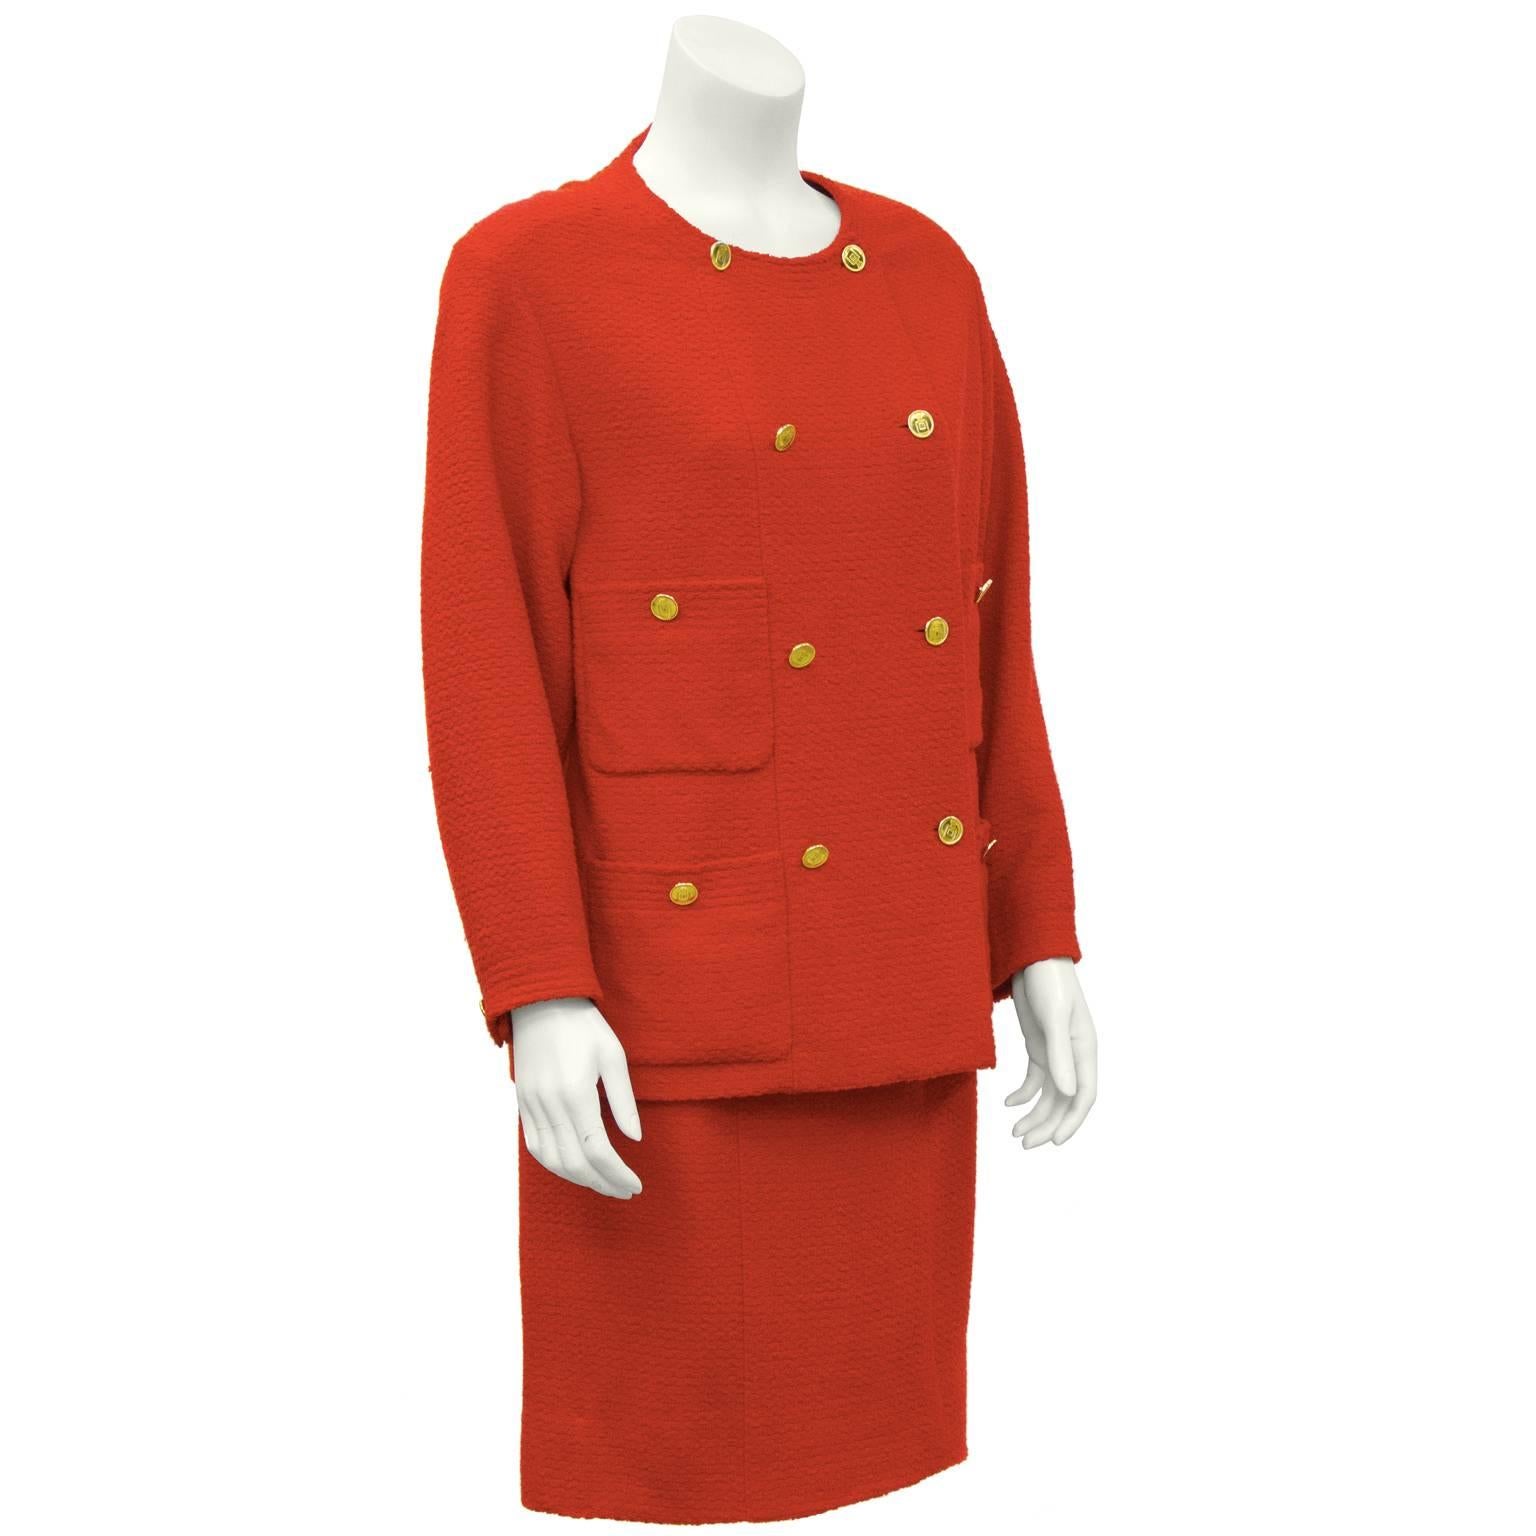 Chanel red boucle 1980’s panel front skirt suit. Jacket has four front pockets and does up the front with gold Chanel buttons featuring the iconic Chanel perfume bottle. Matching buttons on the cuffs. The matching red skirt zips up the back and has